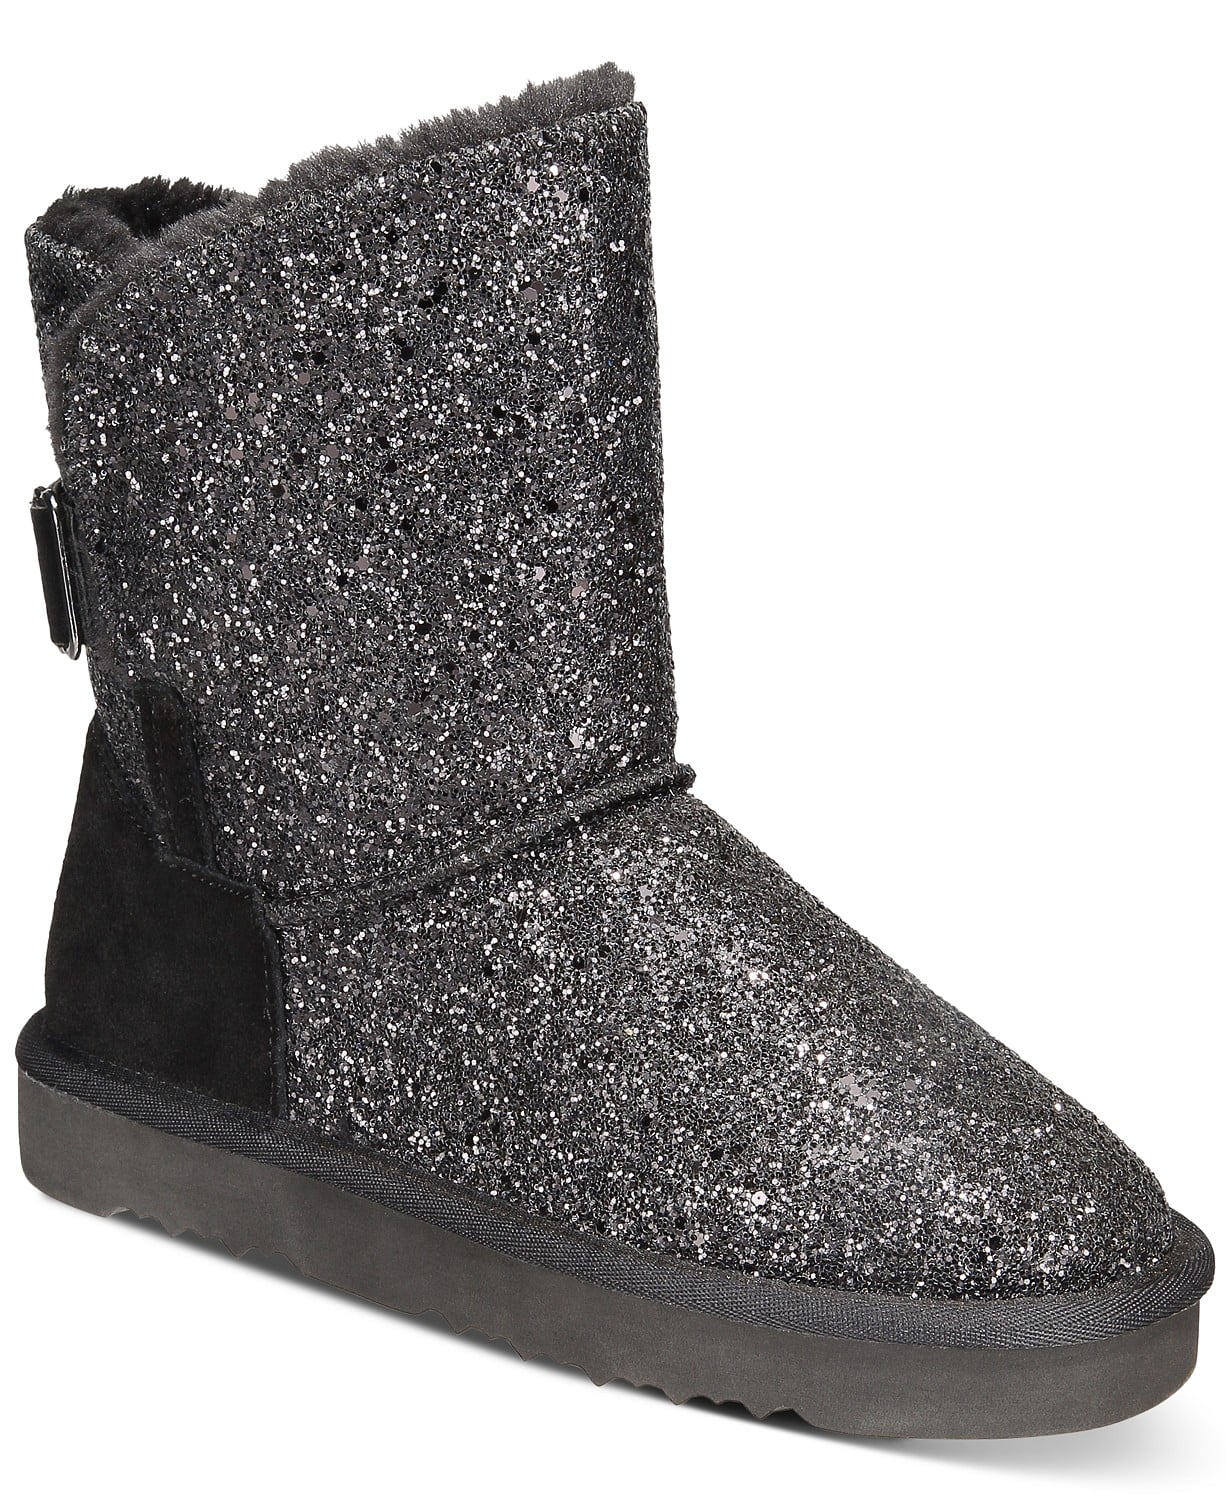 www.couturepoint.com-style-amp-co-womens-black-glitter-suede-teenyy-cold-weather-booties